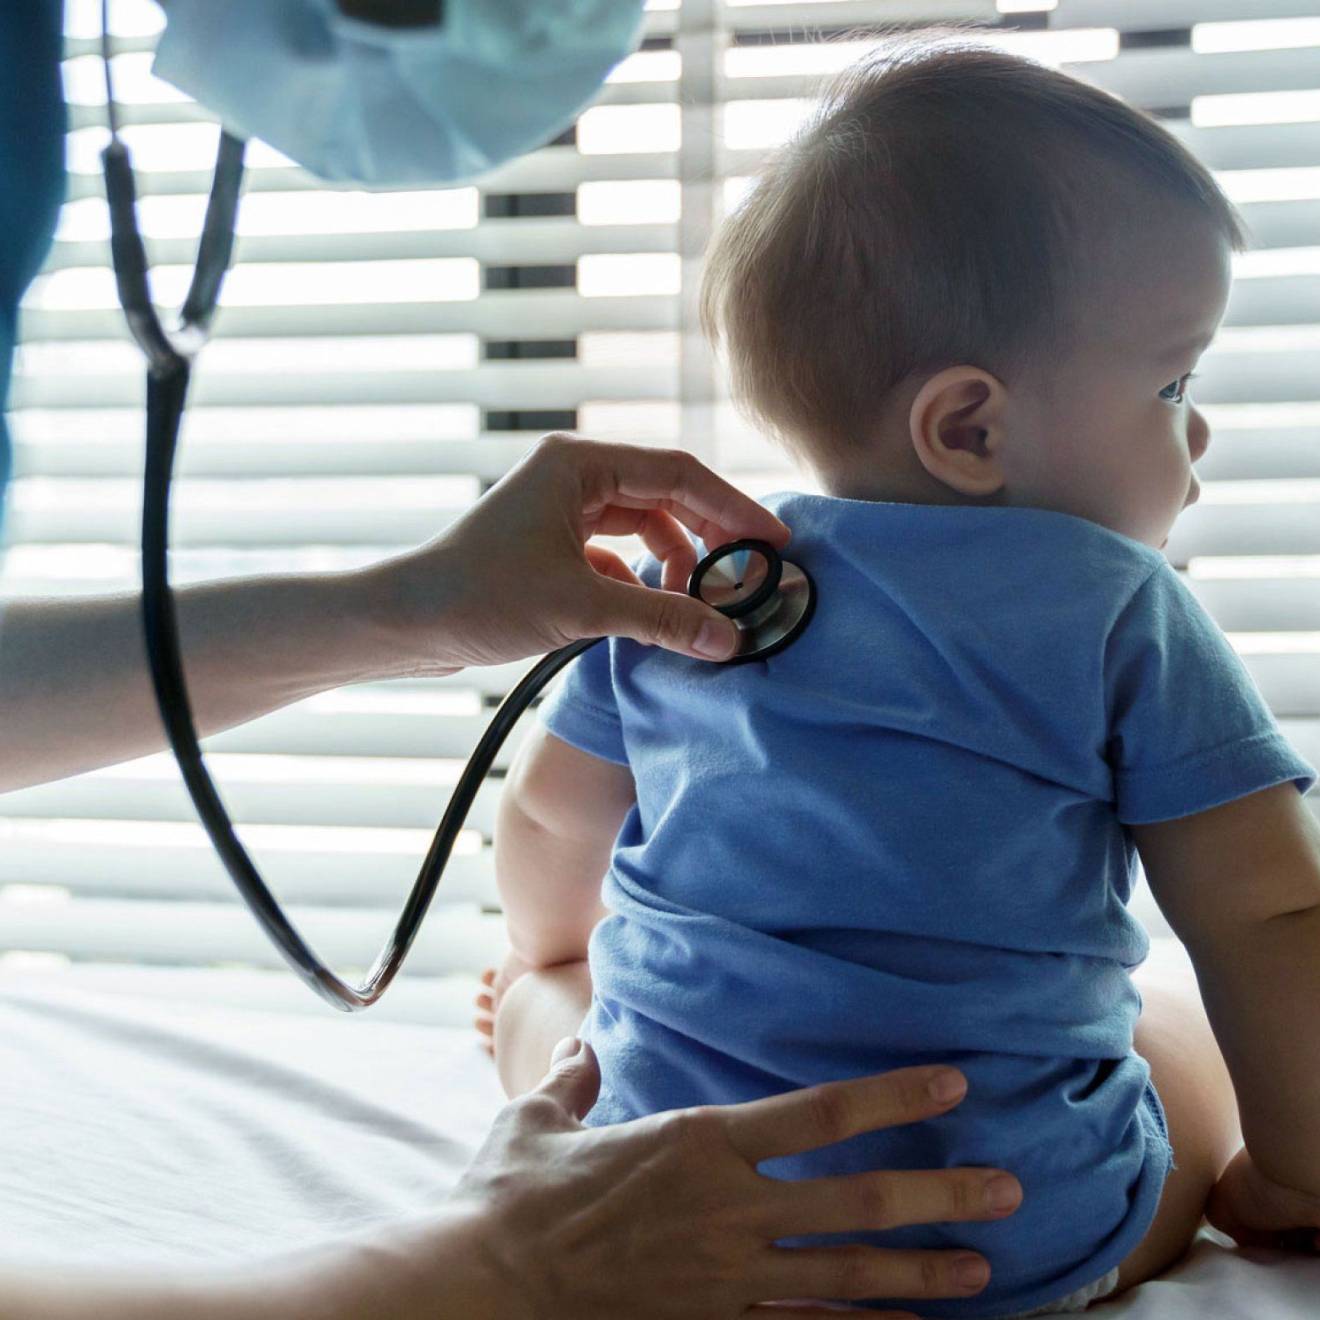 An infant getting checked by a pediatrician with a stethoscope